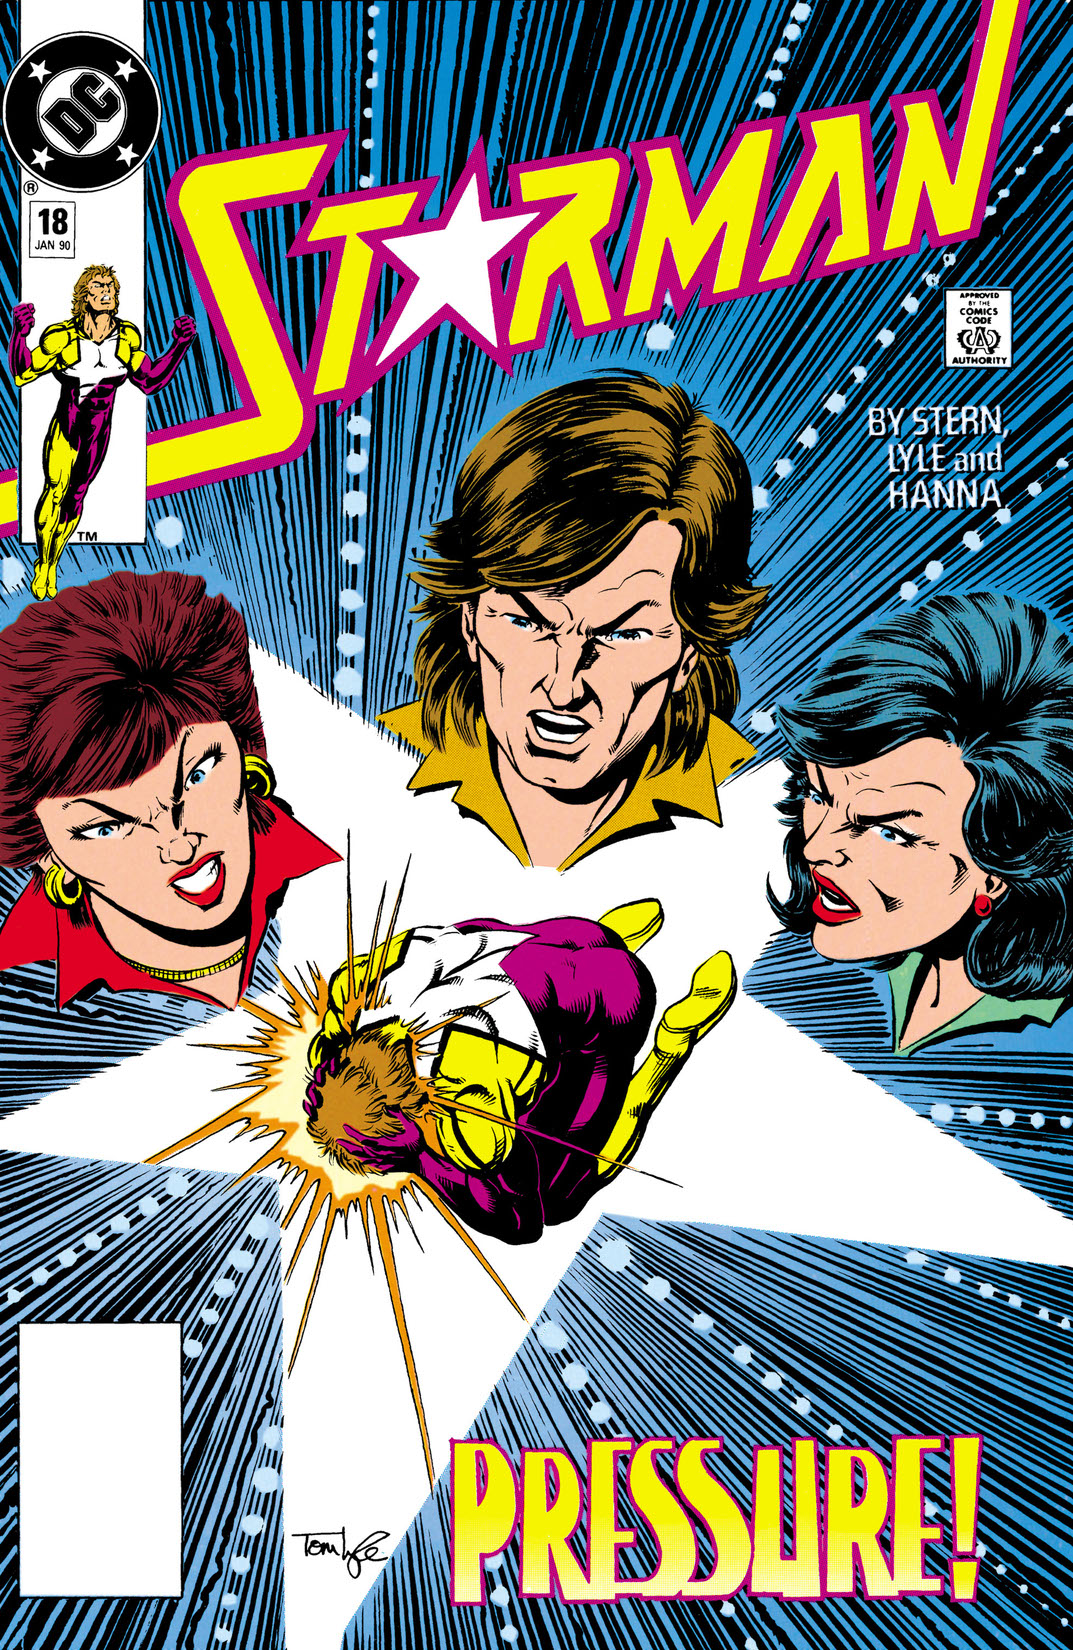 Starman (1988-1992) #18 preview images